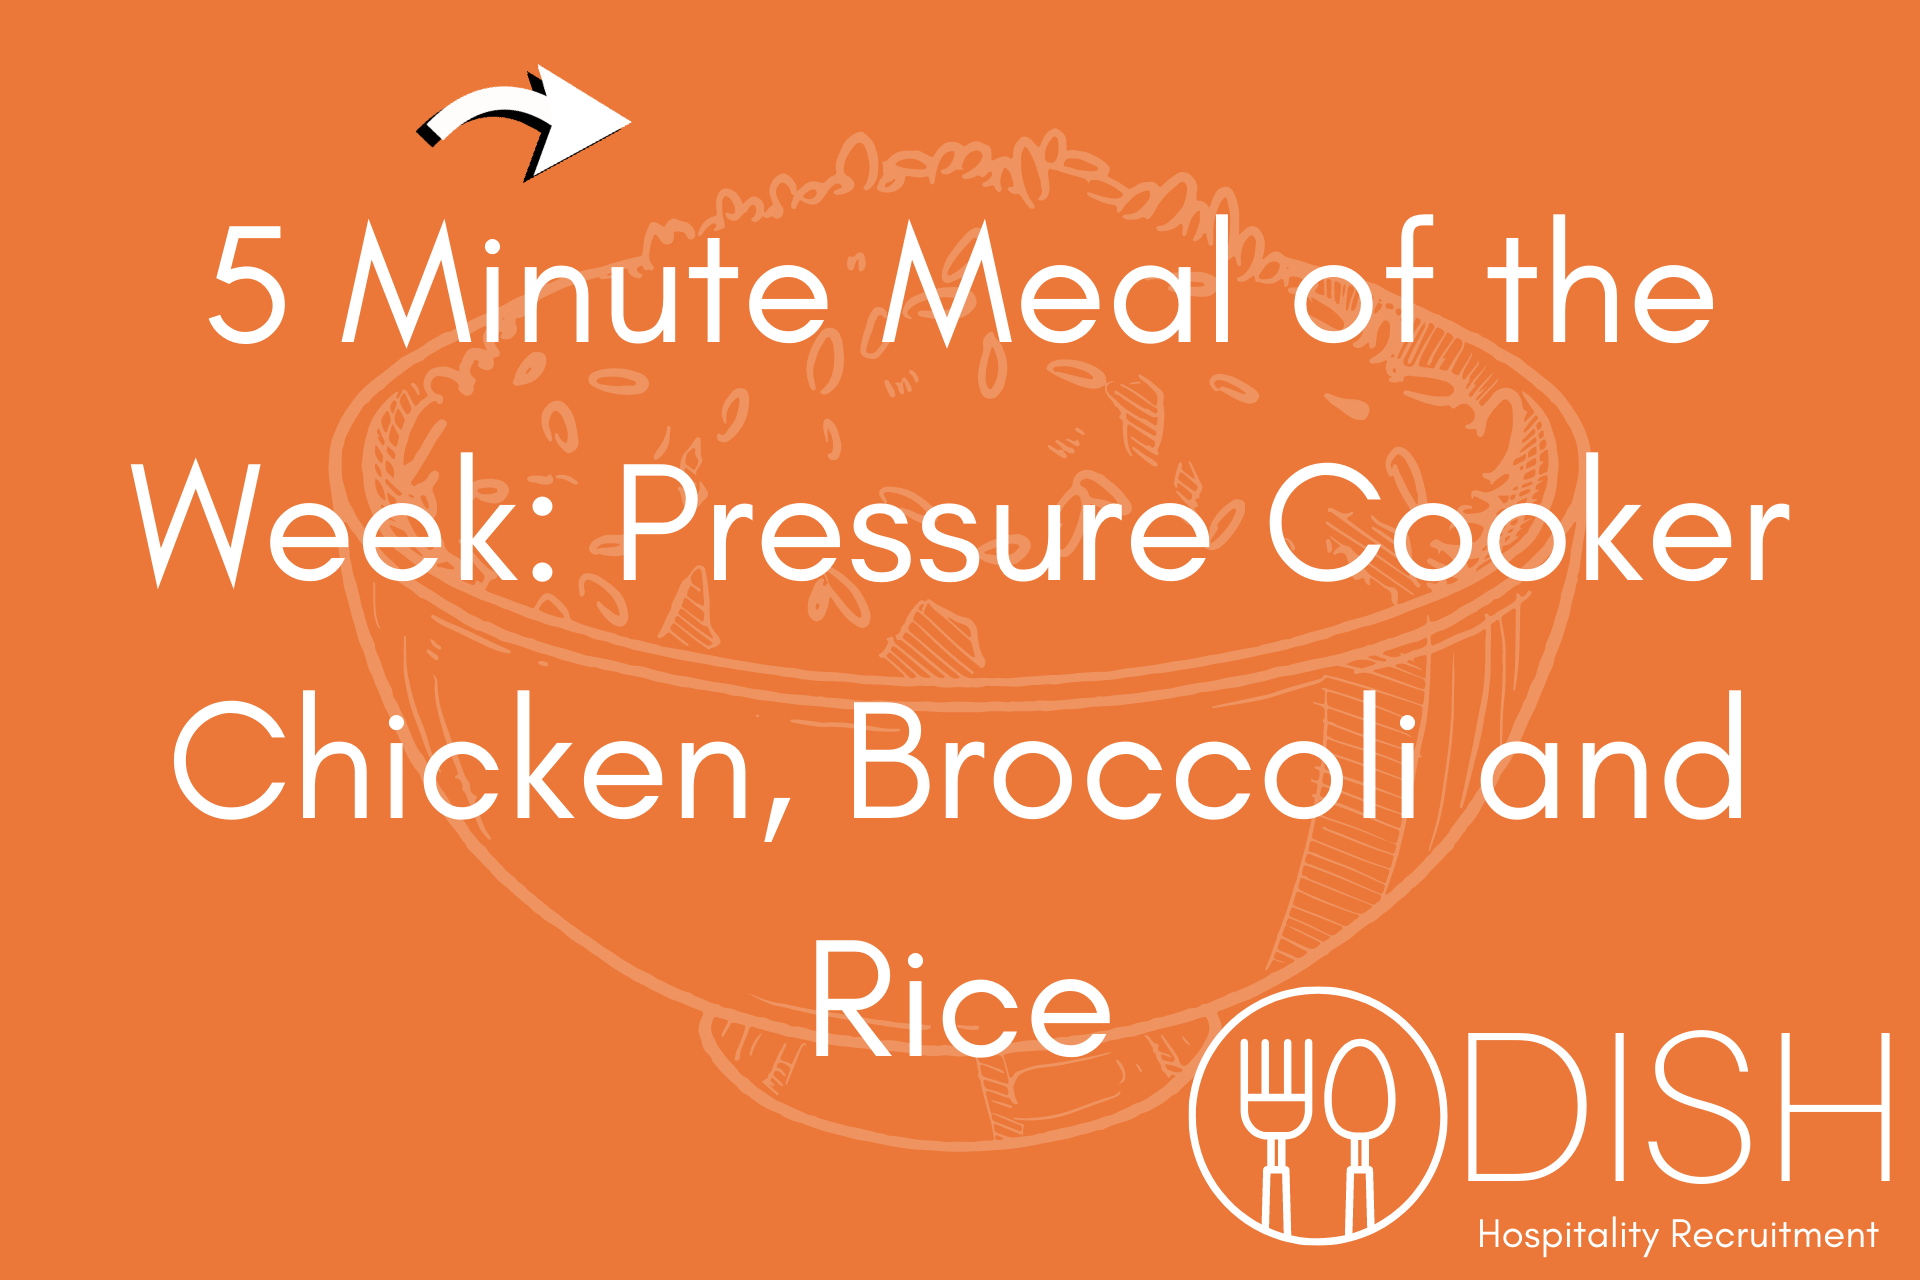 5 Minute Meal of the Week: Pressure Cooker Chicken, Broccoli and Rice